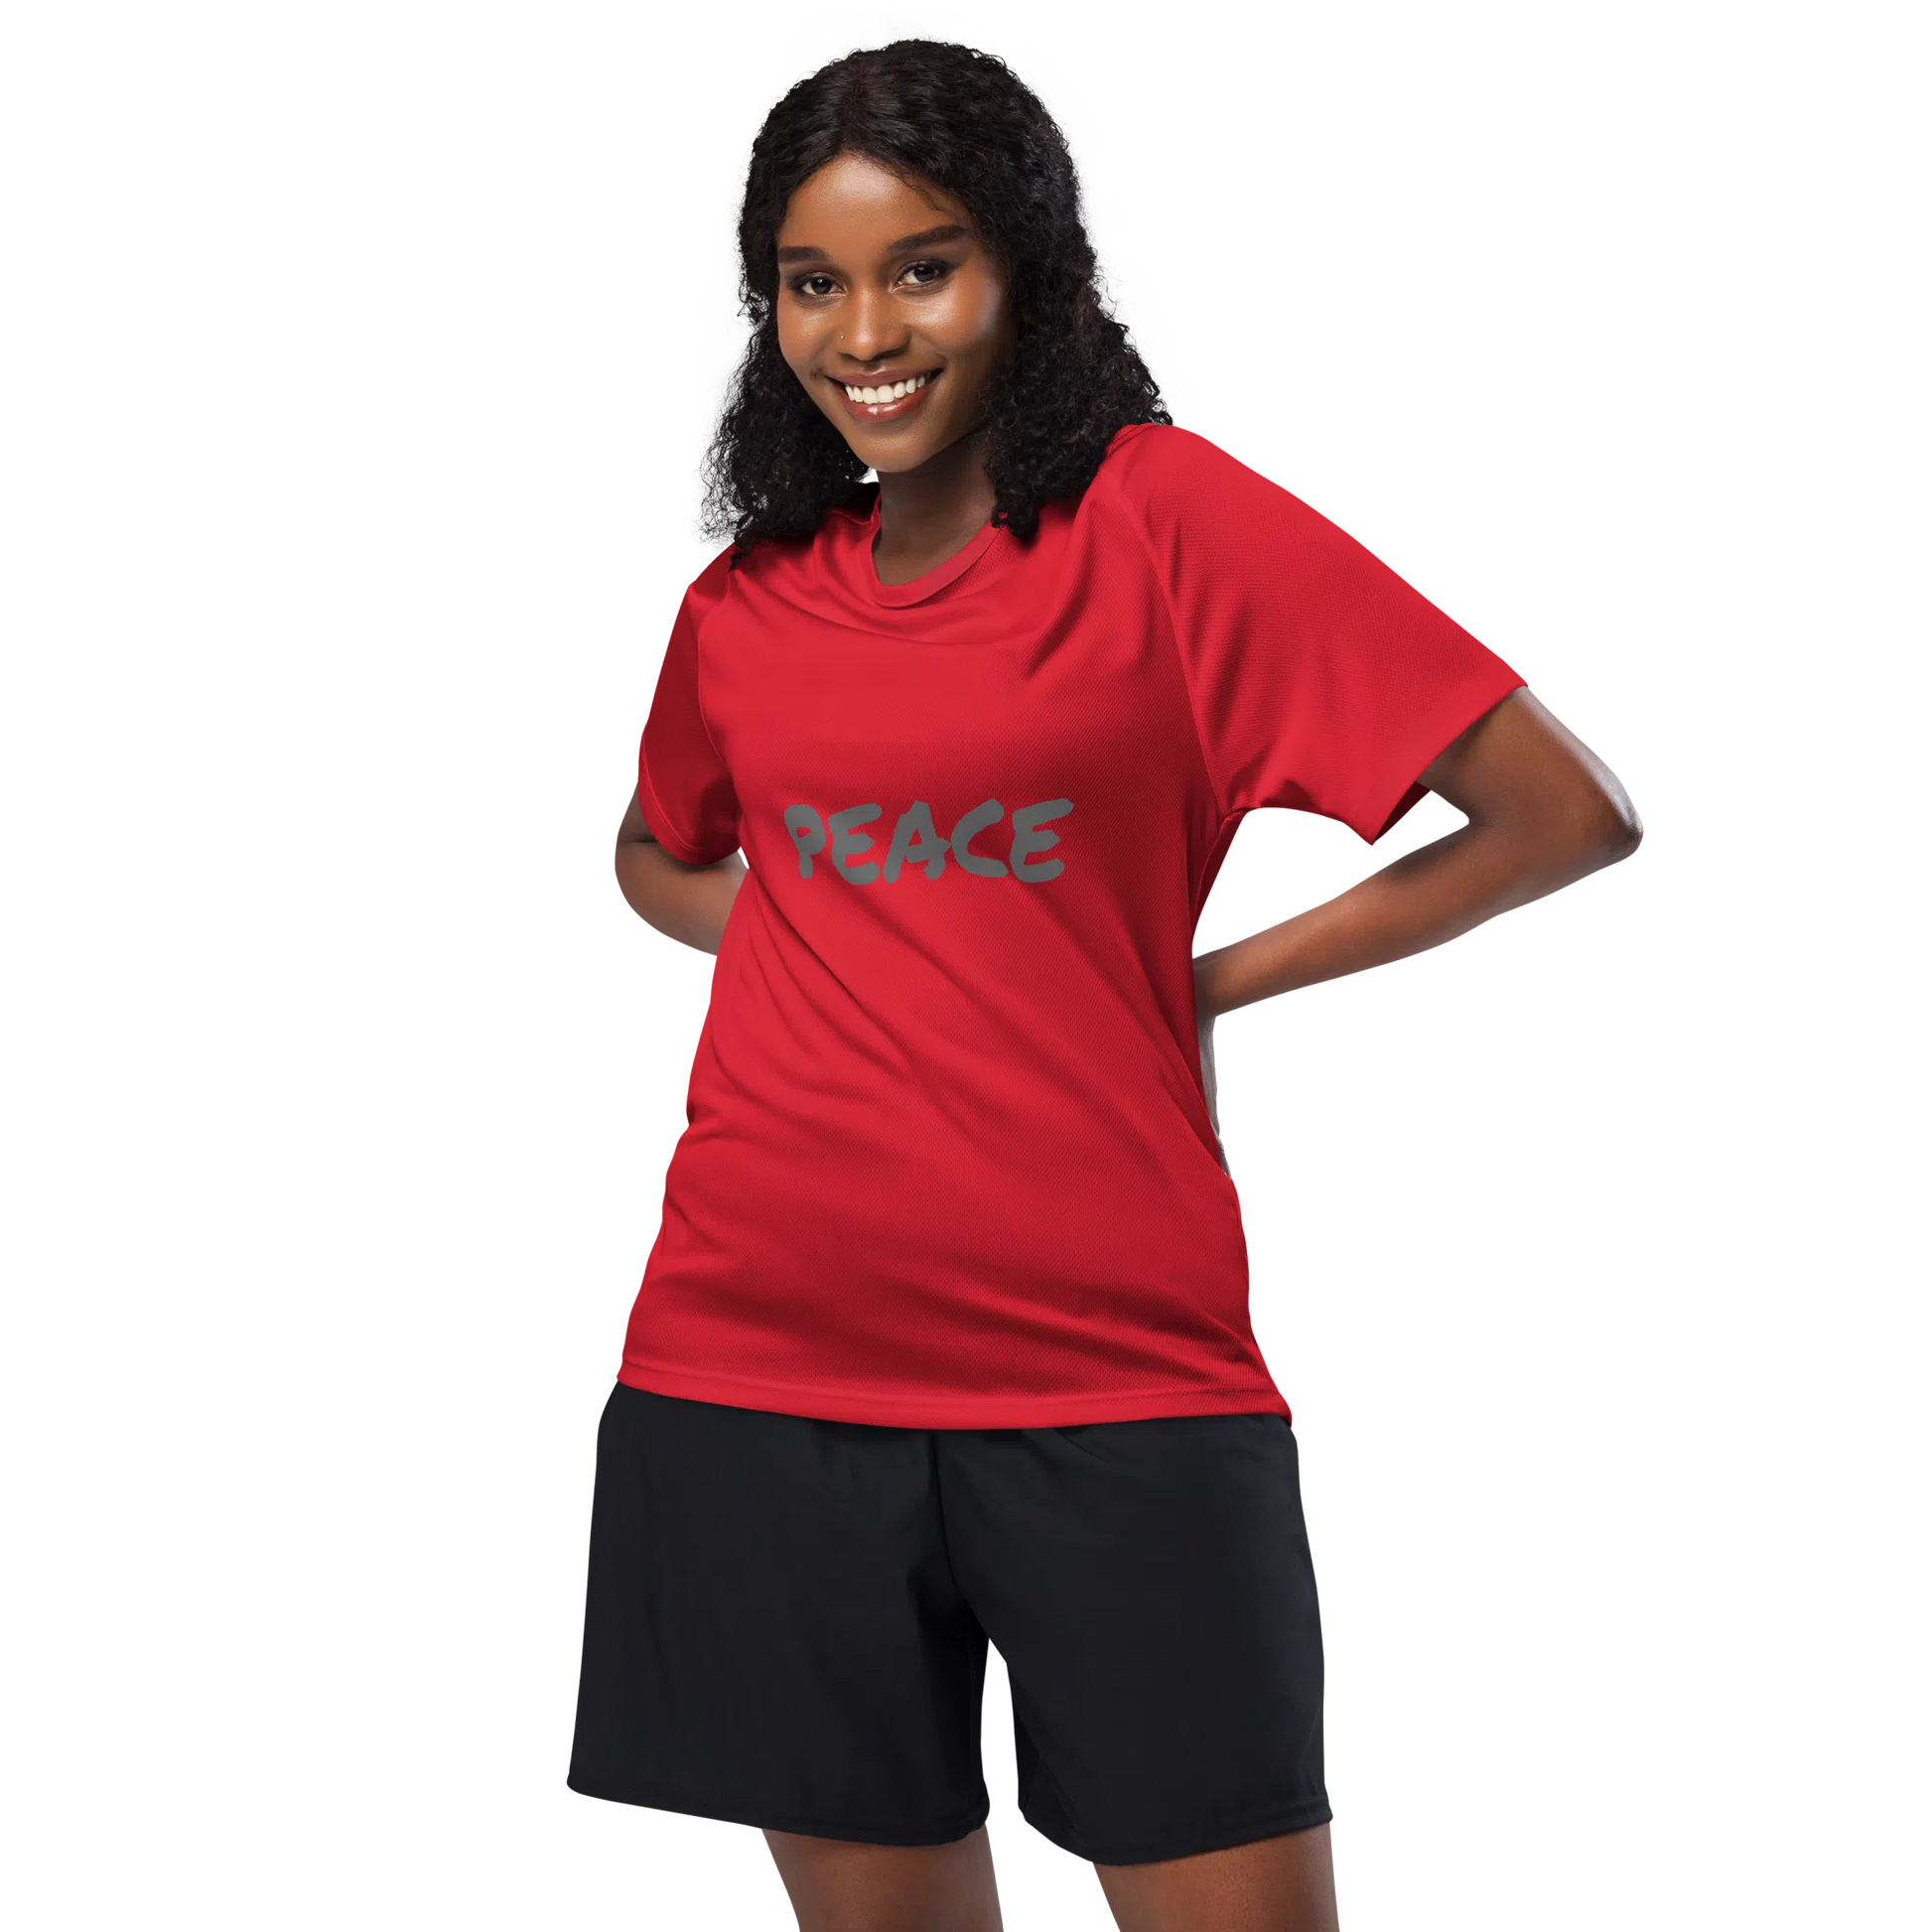 Women's Performance Sports Jersey - Breathable Comfort for Fitness and Leisure